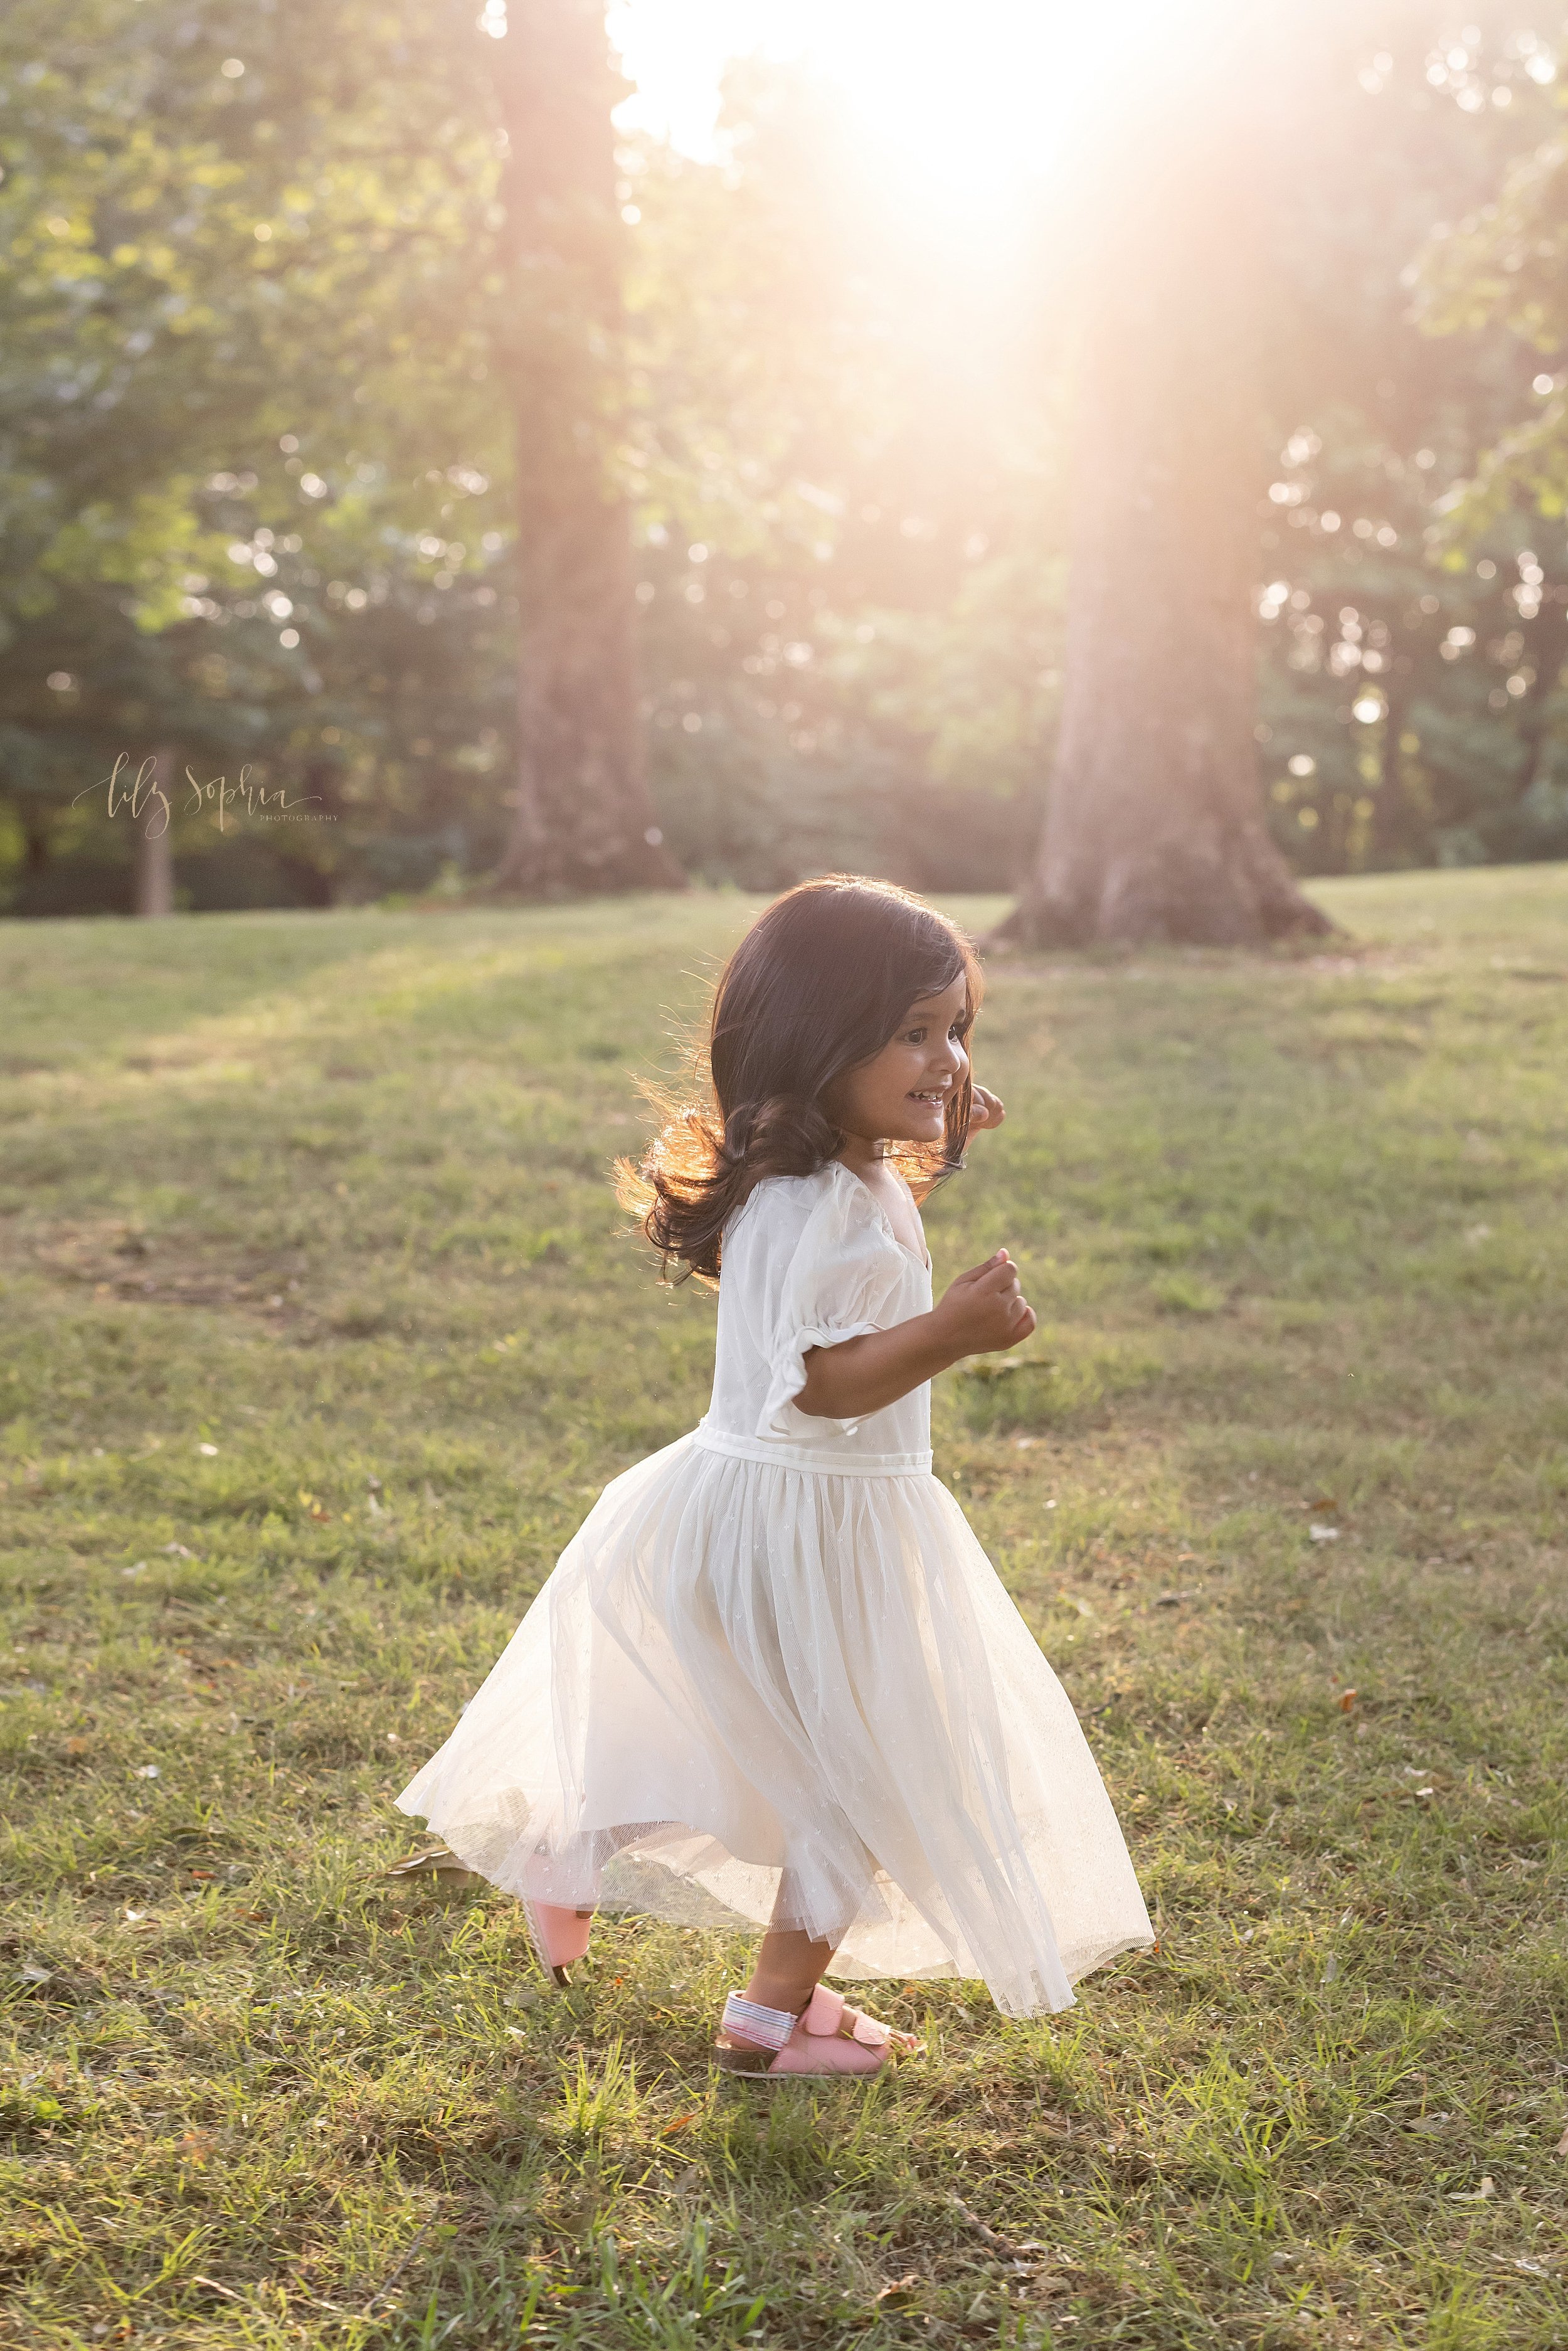  Family picture of a young Indian girl running through an Atlanta park at sunset. 